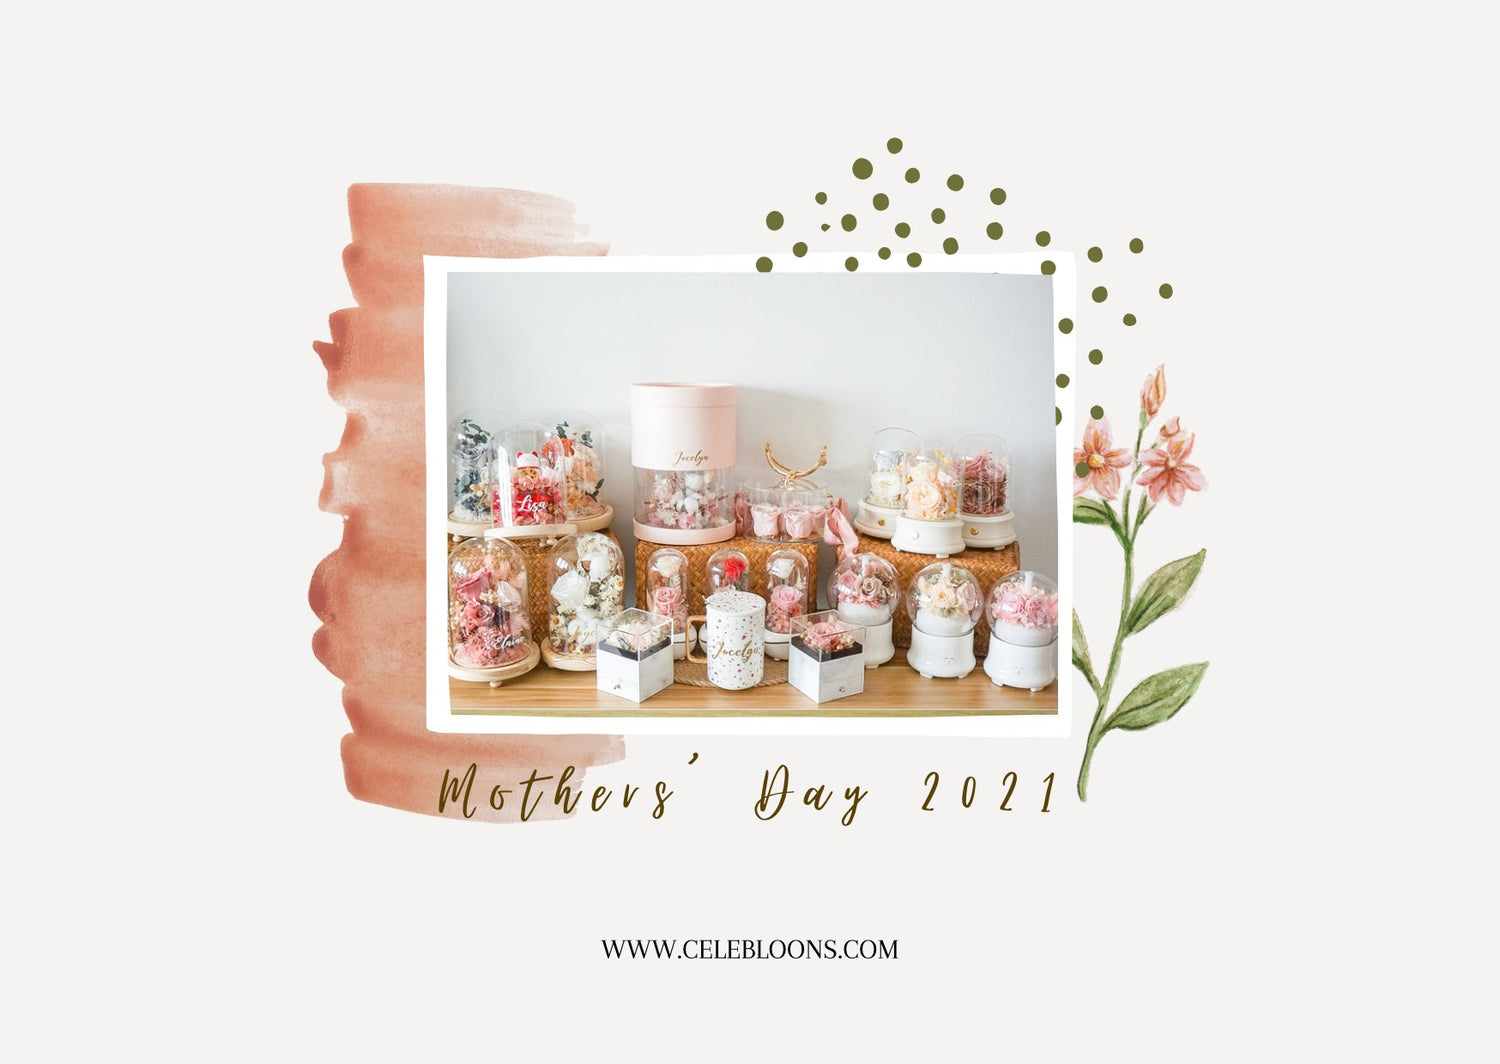 Mothers' Day 2021